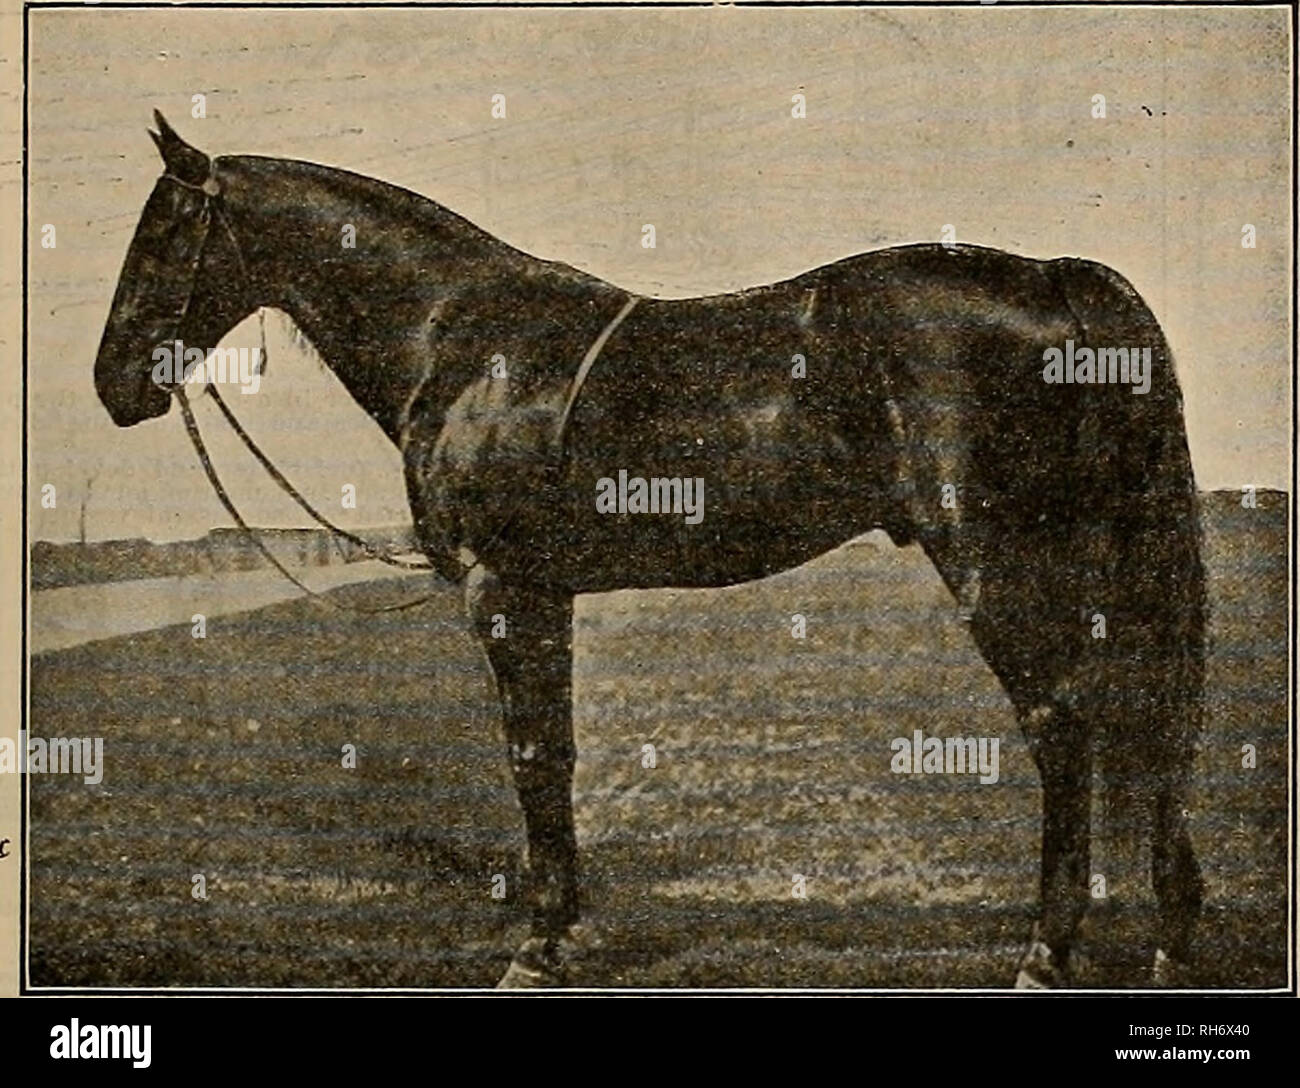 . Breeder and sportsman. Horses. Saturday, December 27, 1913.] THE BREEDER AND SPORTSMAN 23 The Bondsman 37641 Trial A- 2-A1. SIRE OF Colorado E (3) race record 2:04% World's Champion 3-year-old stallion. Col. Franklin (1913) 2:06% The Plunger (4) 2:07% A winner in both America and Europe. Creighton 2:08% Grace Bond (2) 2:14 (3) 2:09% Winner of two and three-year-old futurity. Carmen McCan 2:09% Lizzie Brown (1813) 2: 10 Arion Bond (a sire) 2:11 The Clansman (a sire) 2:13% Mary Brown (1913) 2:15% Bon Ton (1913) 2:15% Cecil Bond (p.) (1913) 2:15% And 16 others in 2:23 and better. And others in  Stock Photo